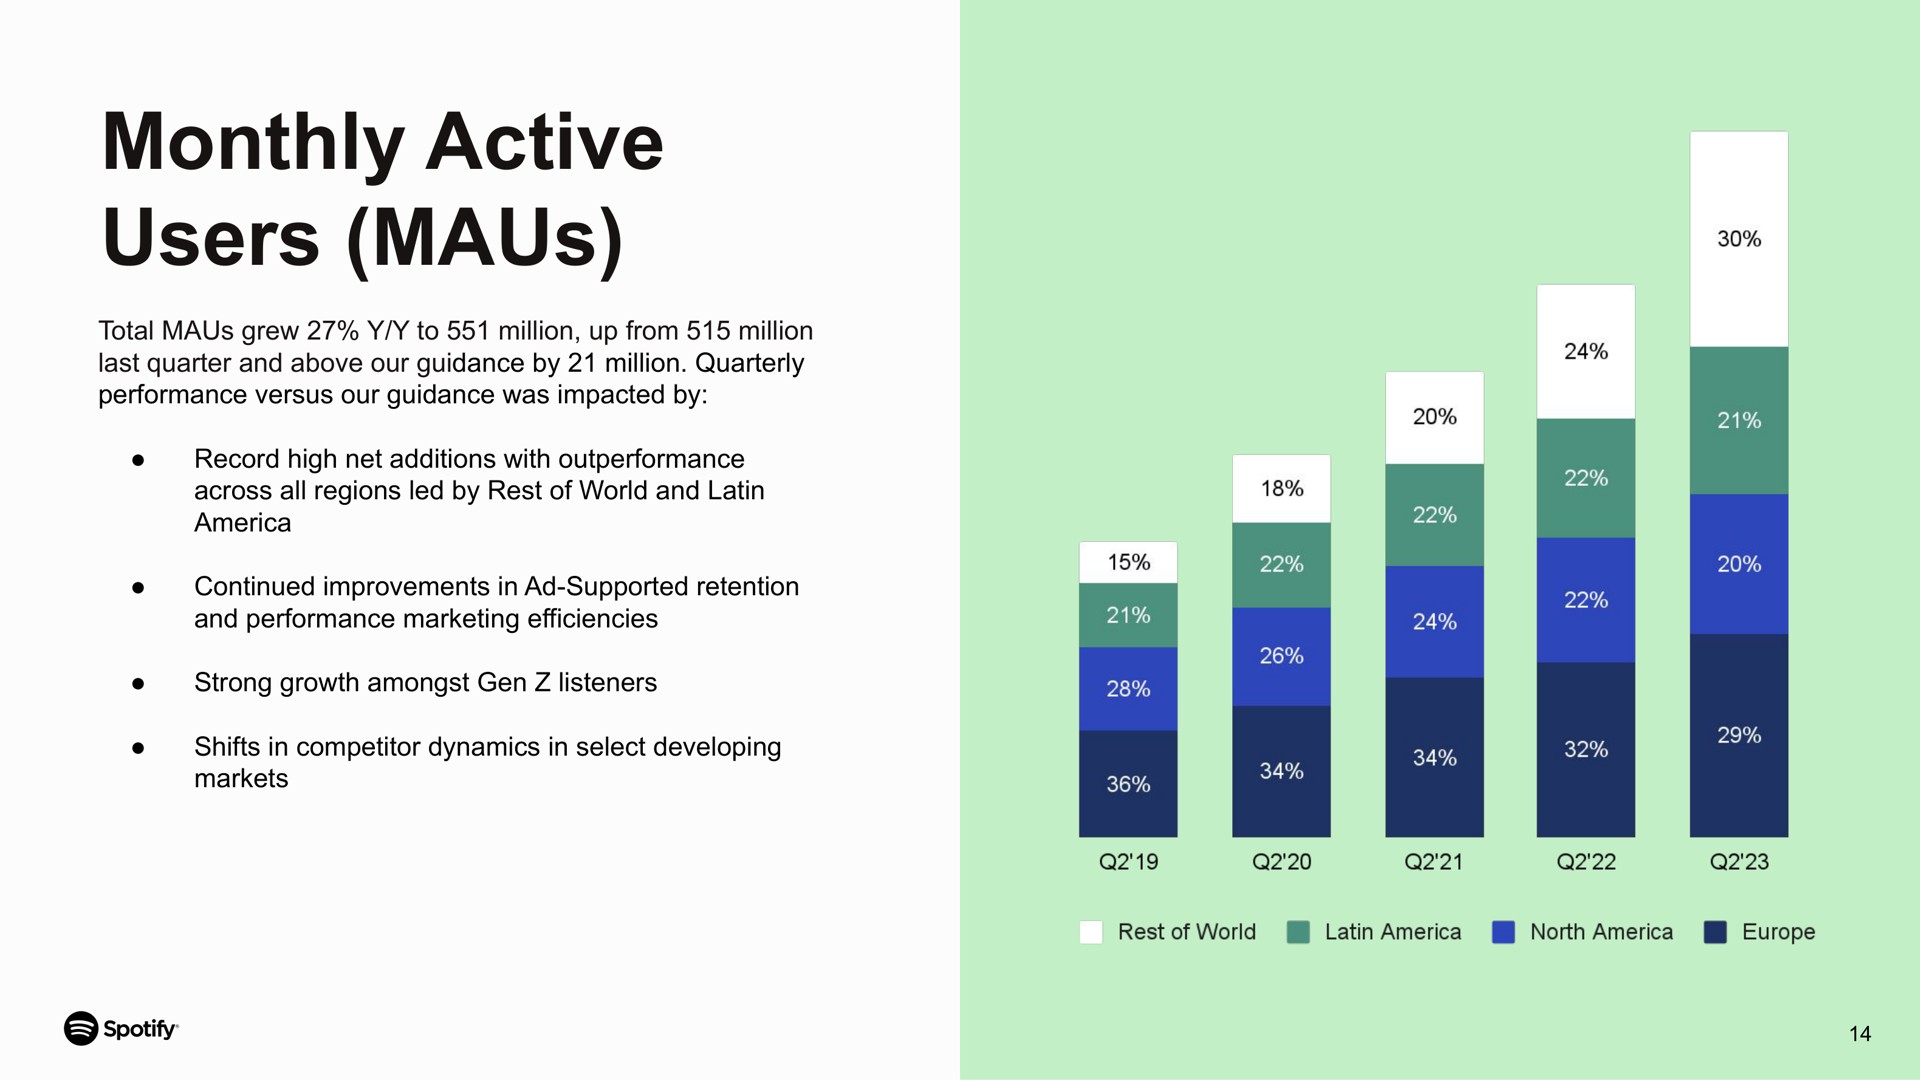 monthly active users and performance marketing efficiencies shifts in competitor dynamics in select developing | Spotify